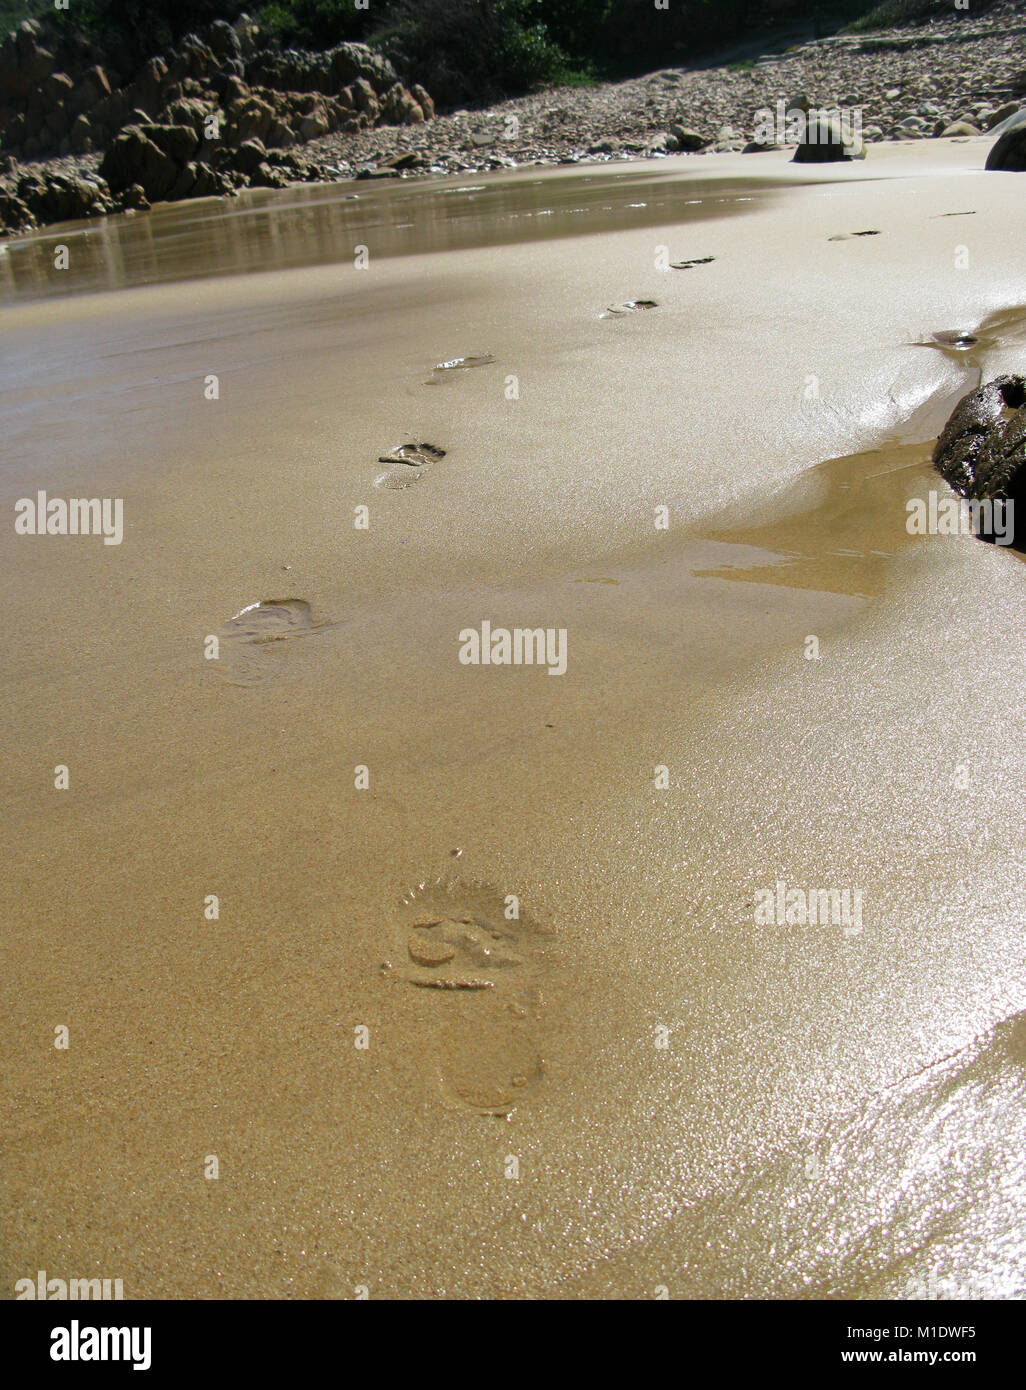 Footsteps in sand on wet beach, South Africa Stock Photo